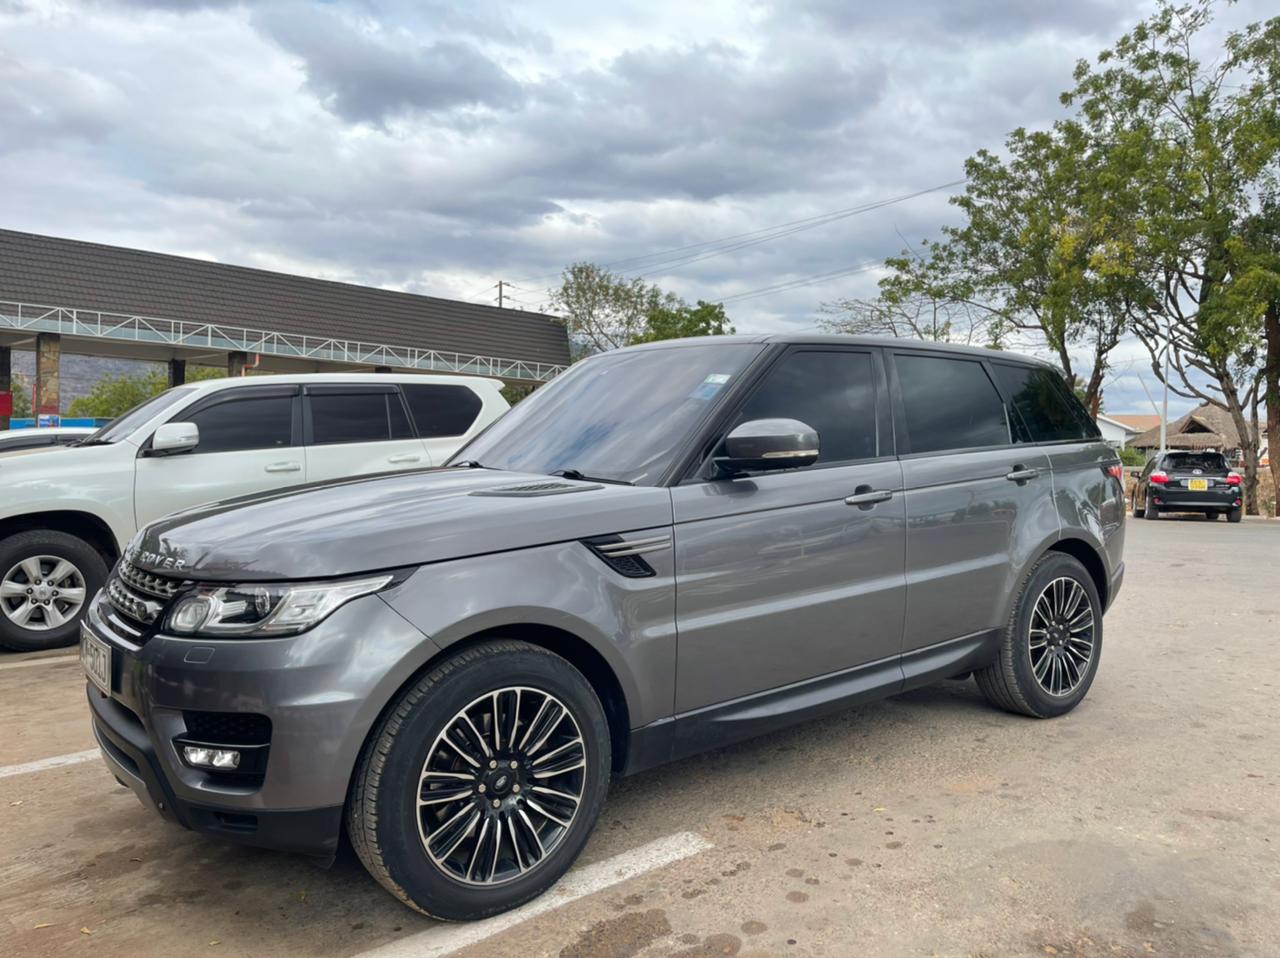 Range Rover Sport 2015 Petrol 3L super Charge New Cheapest Deal